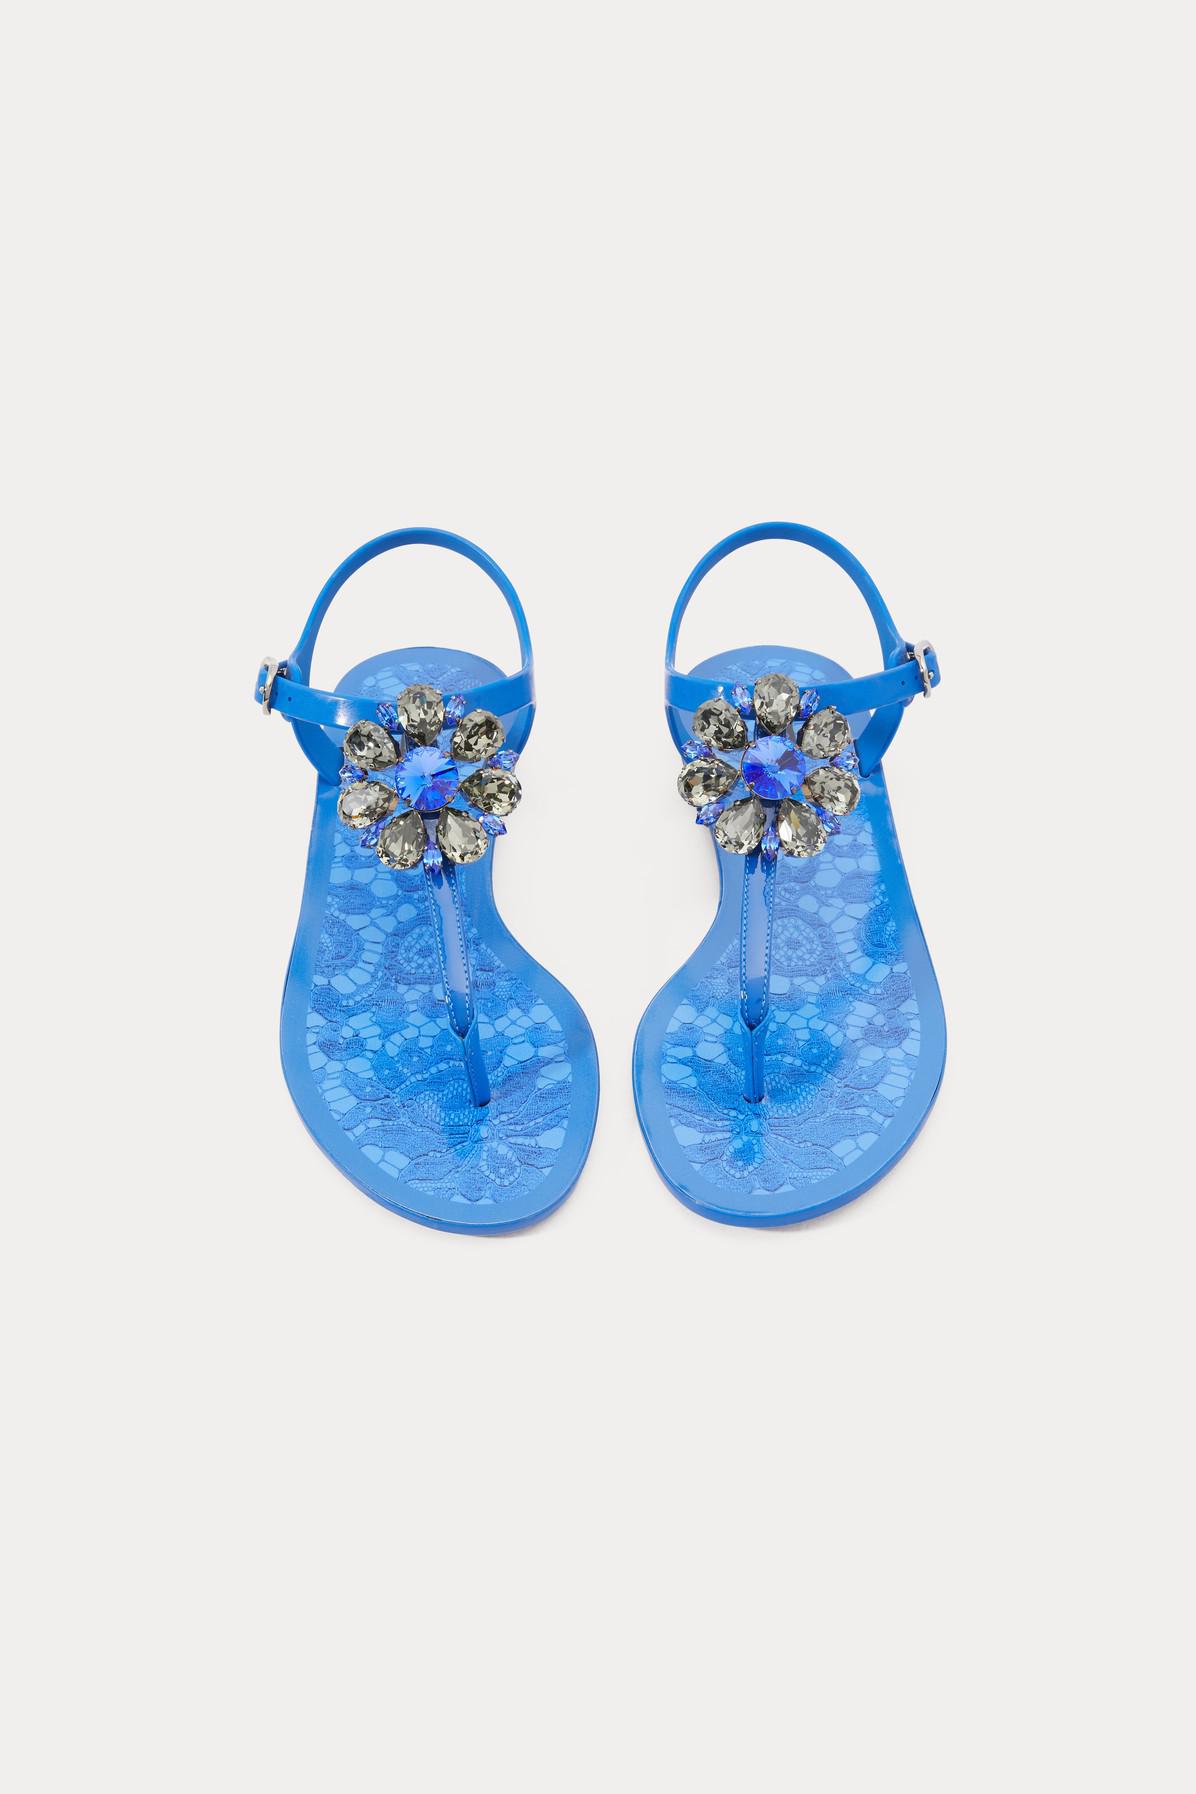 Dolce & Gabbana Jelly Sandals in Blue | Lyst